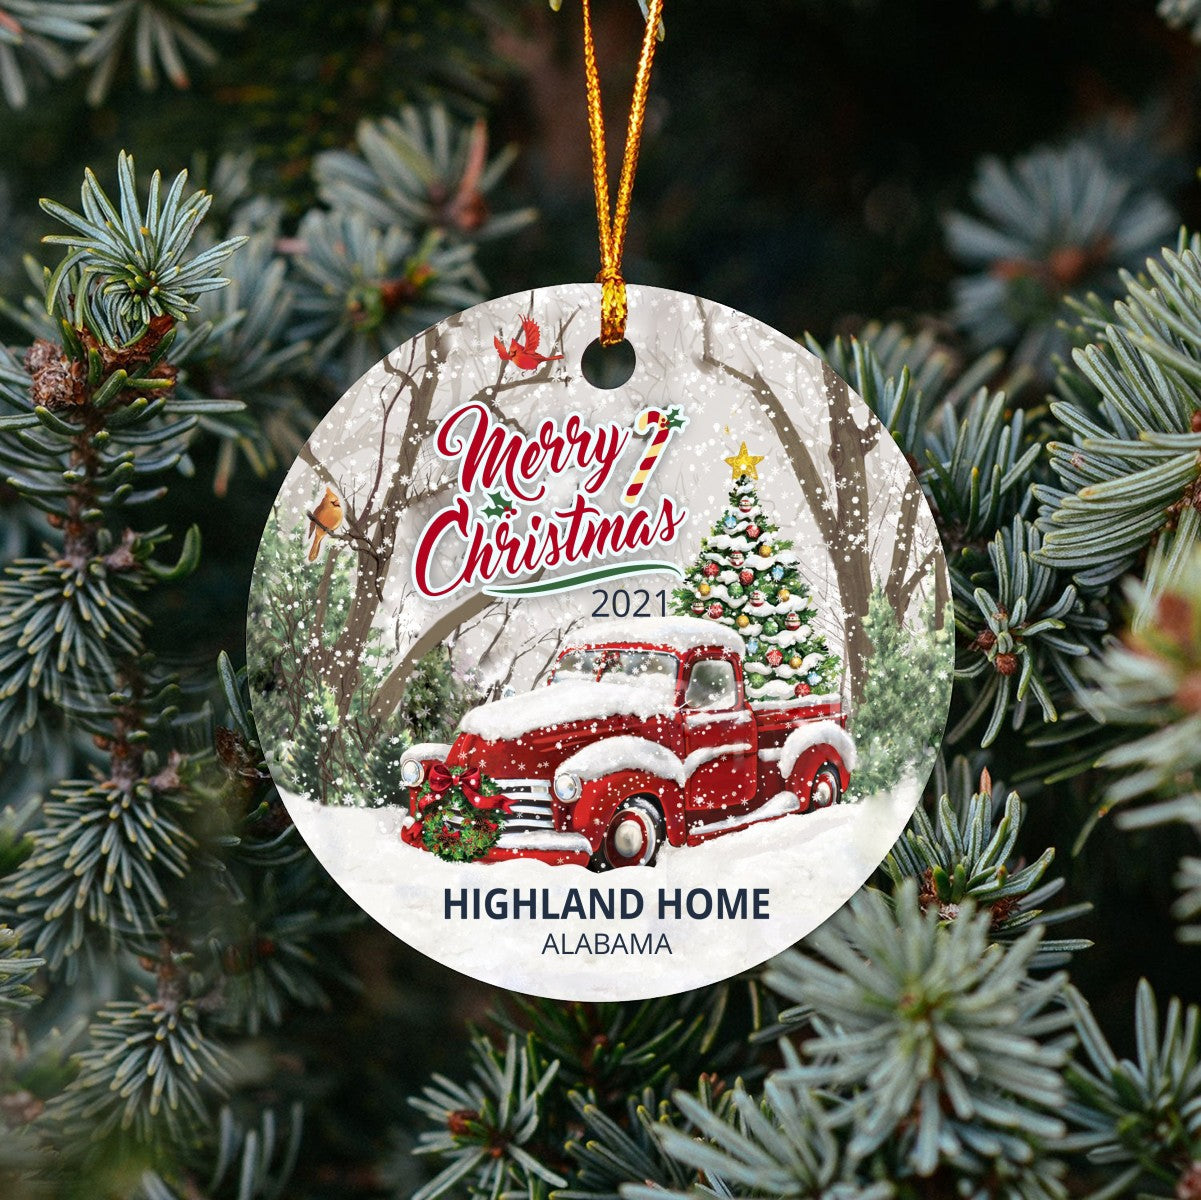 Christmas Tree Ornaments Highland Home - Ornament With Name City, State Highland Home Alabama AL Ornament - Red Truck Xmas Ornaments 3'' Plastic Gift For Family, Friend And Housewarming